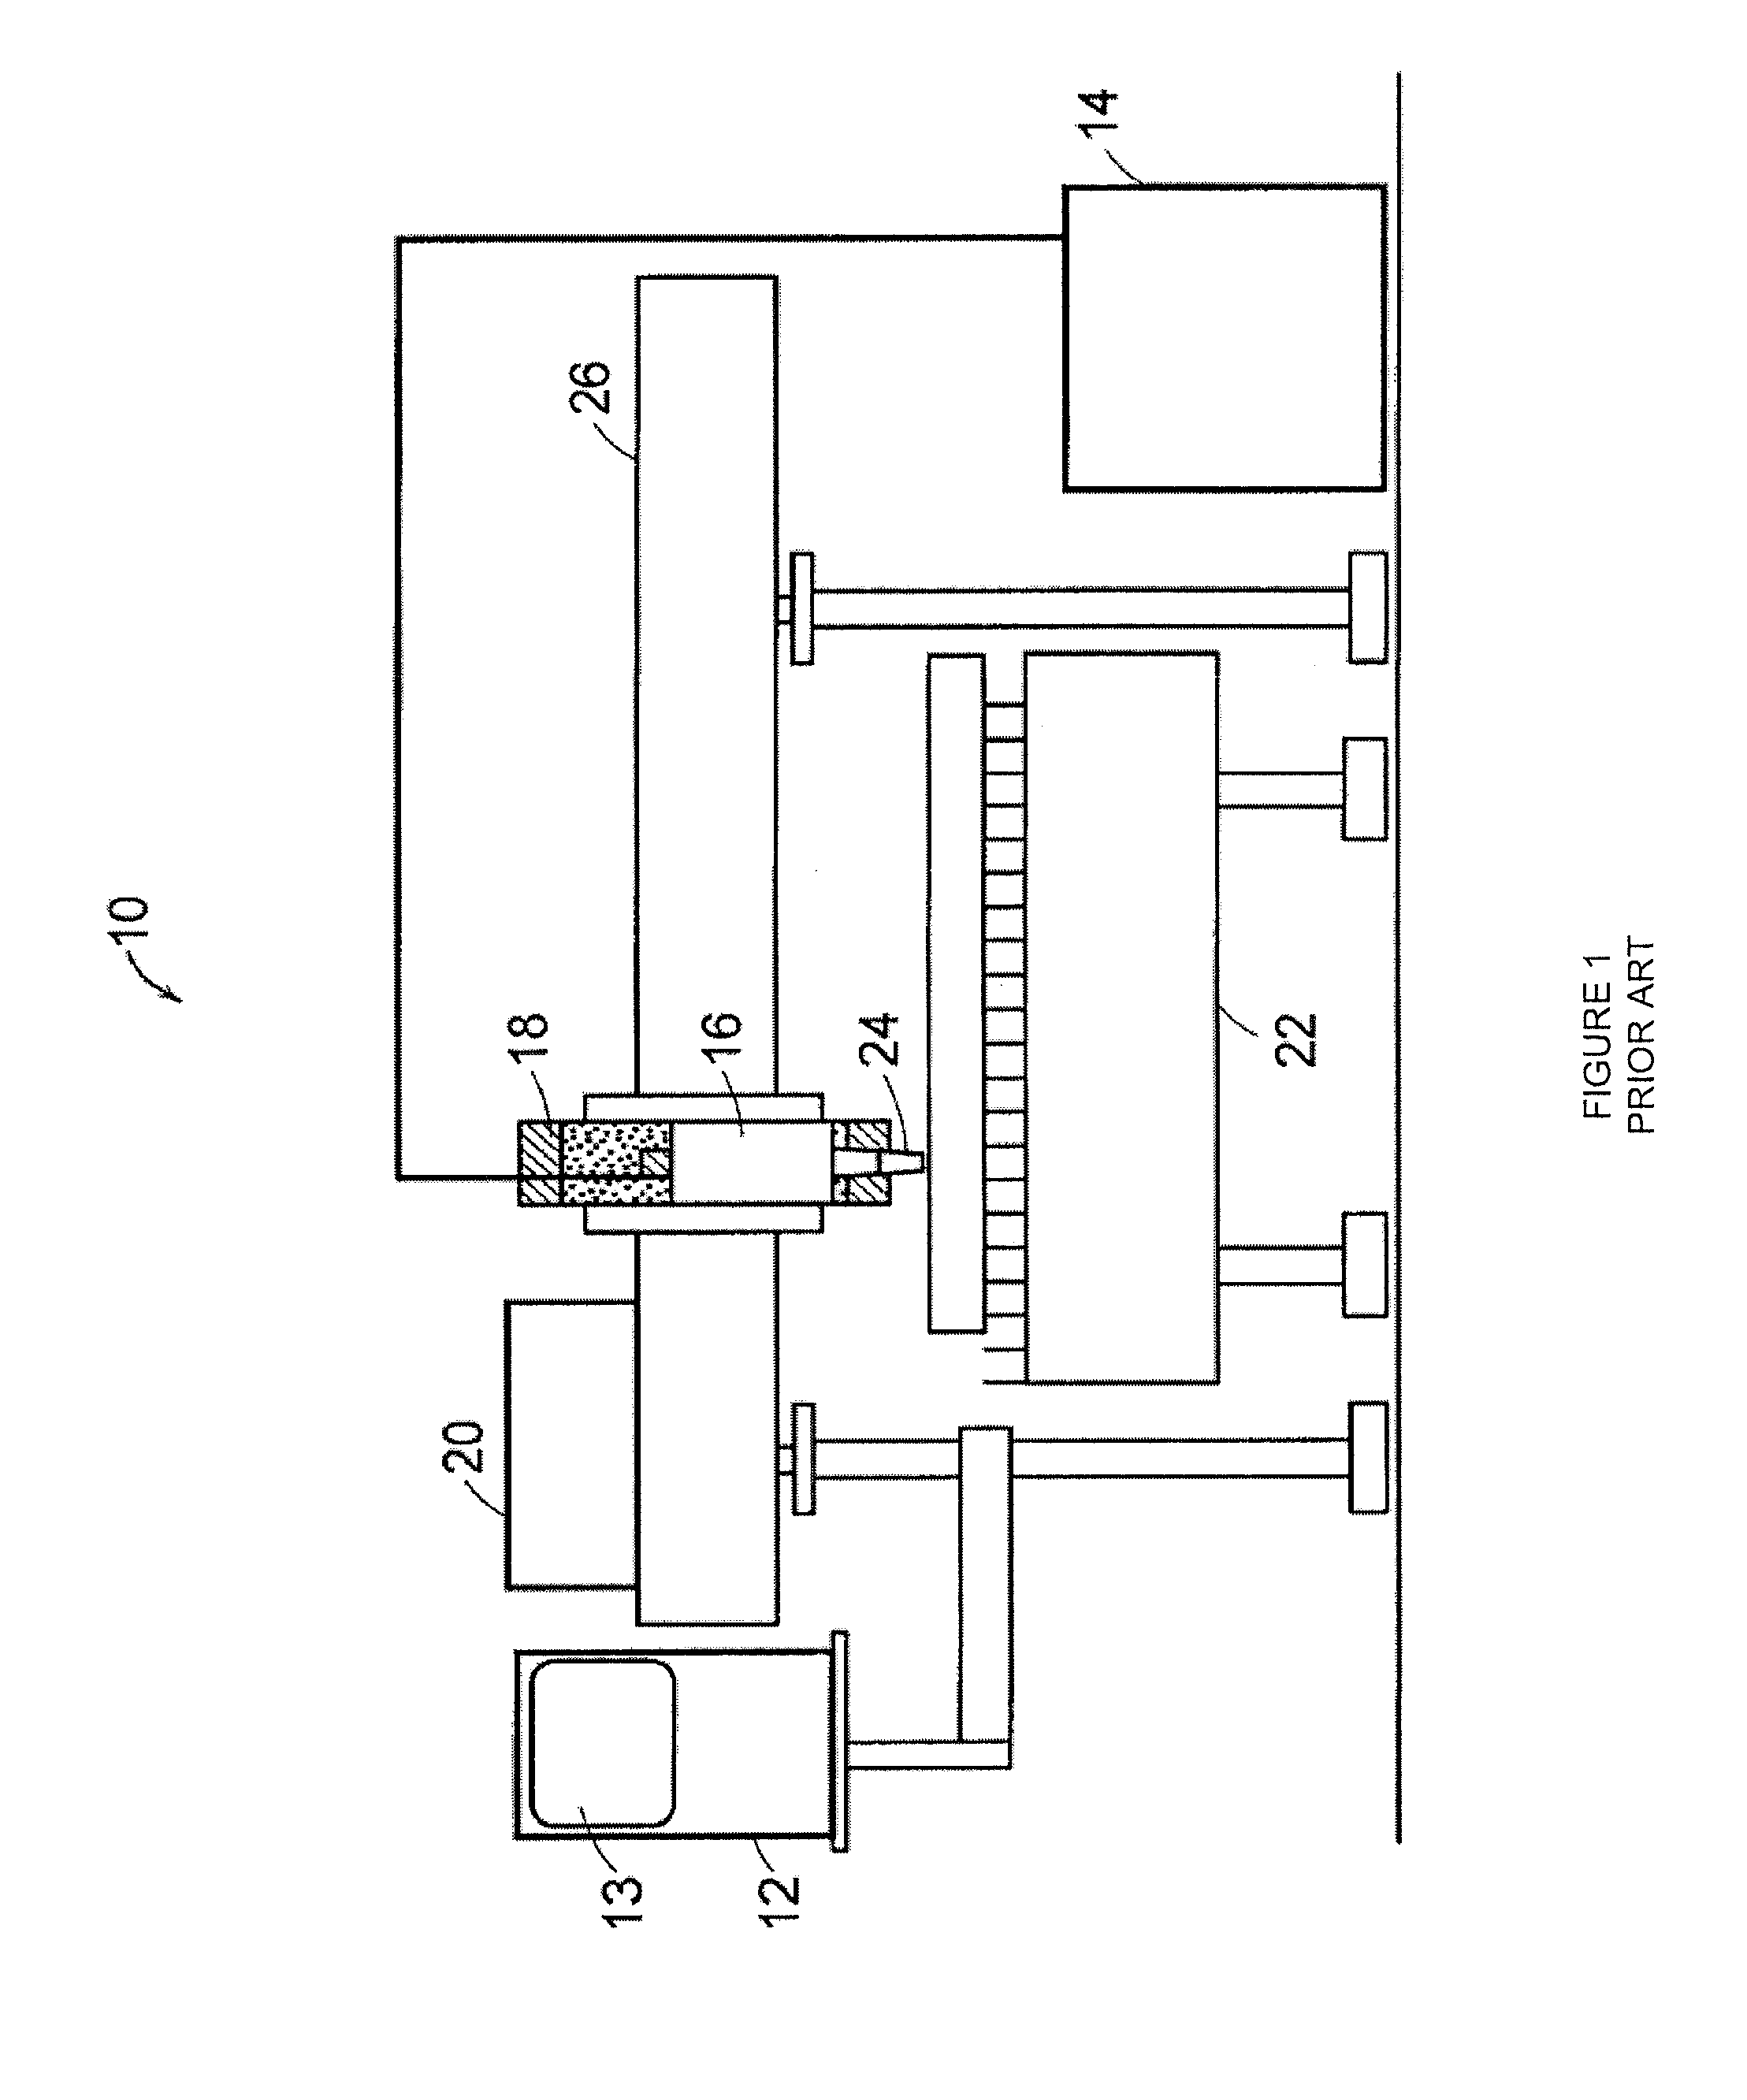 Method And Apparatus For Cutting High Quality Internal Features And Contours